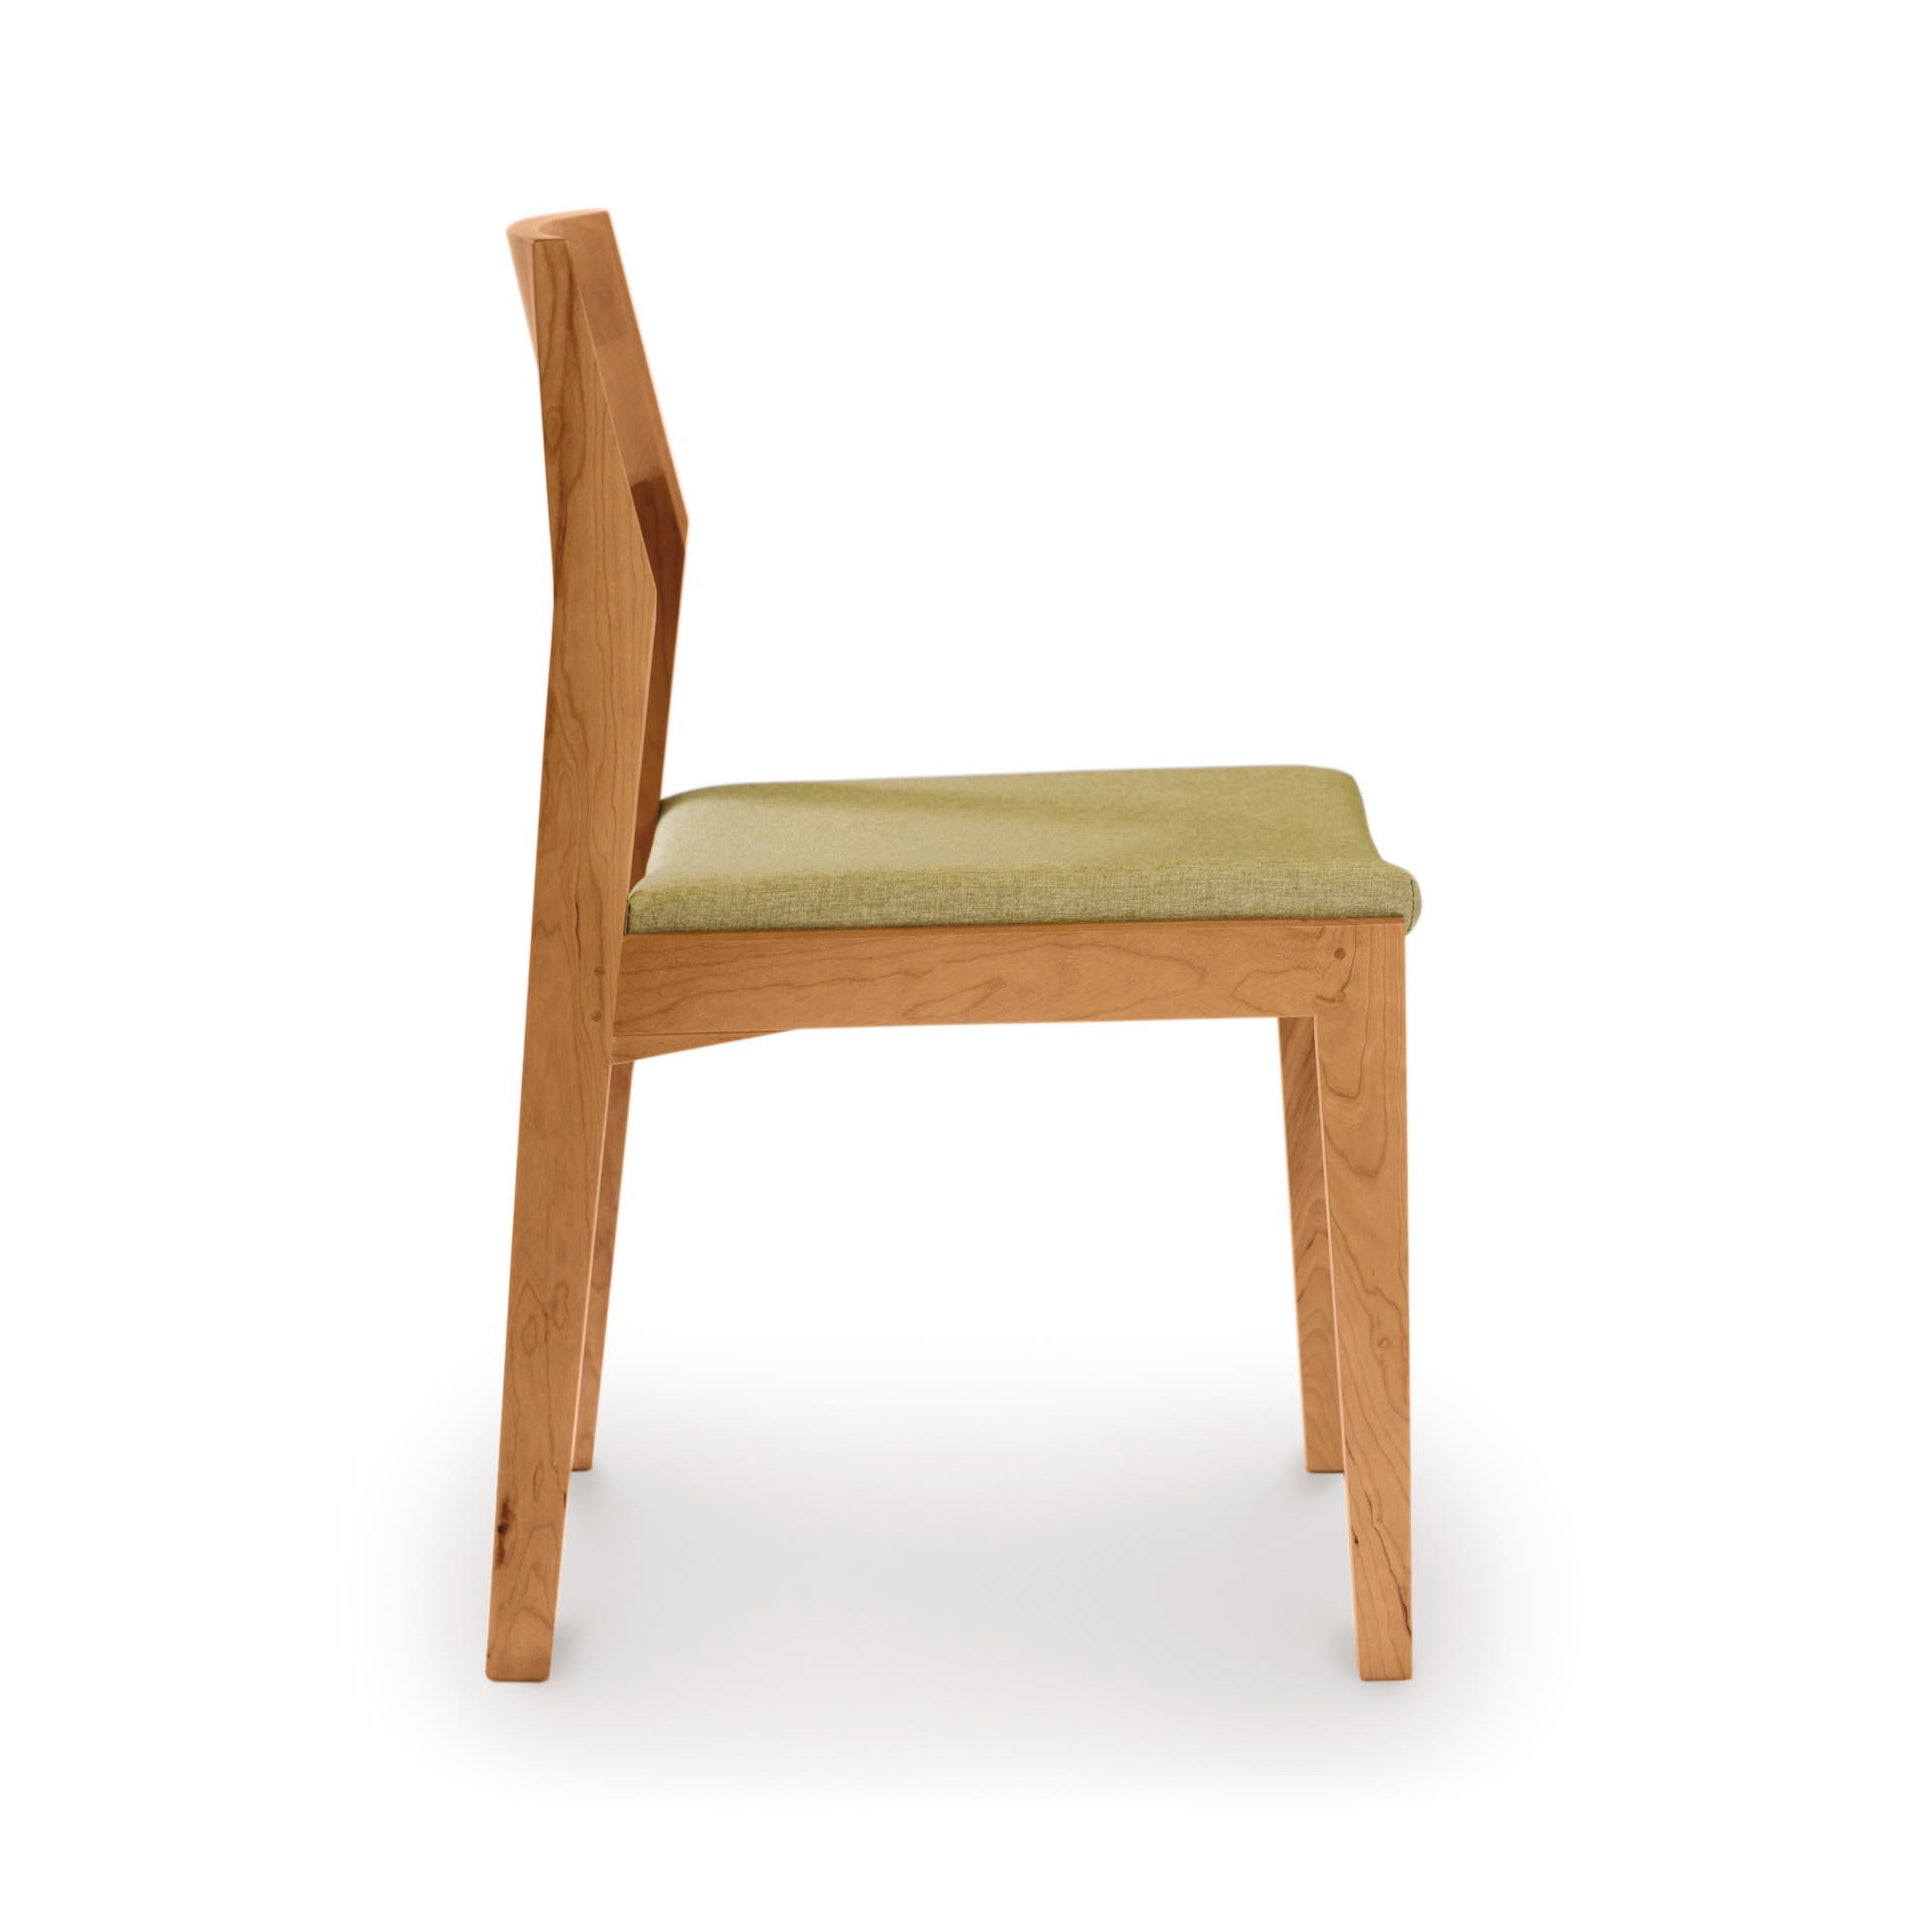 A sustainably sourced hardwood Priority Ship Iso Chair by Copeland Furniture with cherry wood construction and a green upholstered seat.